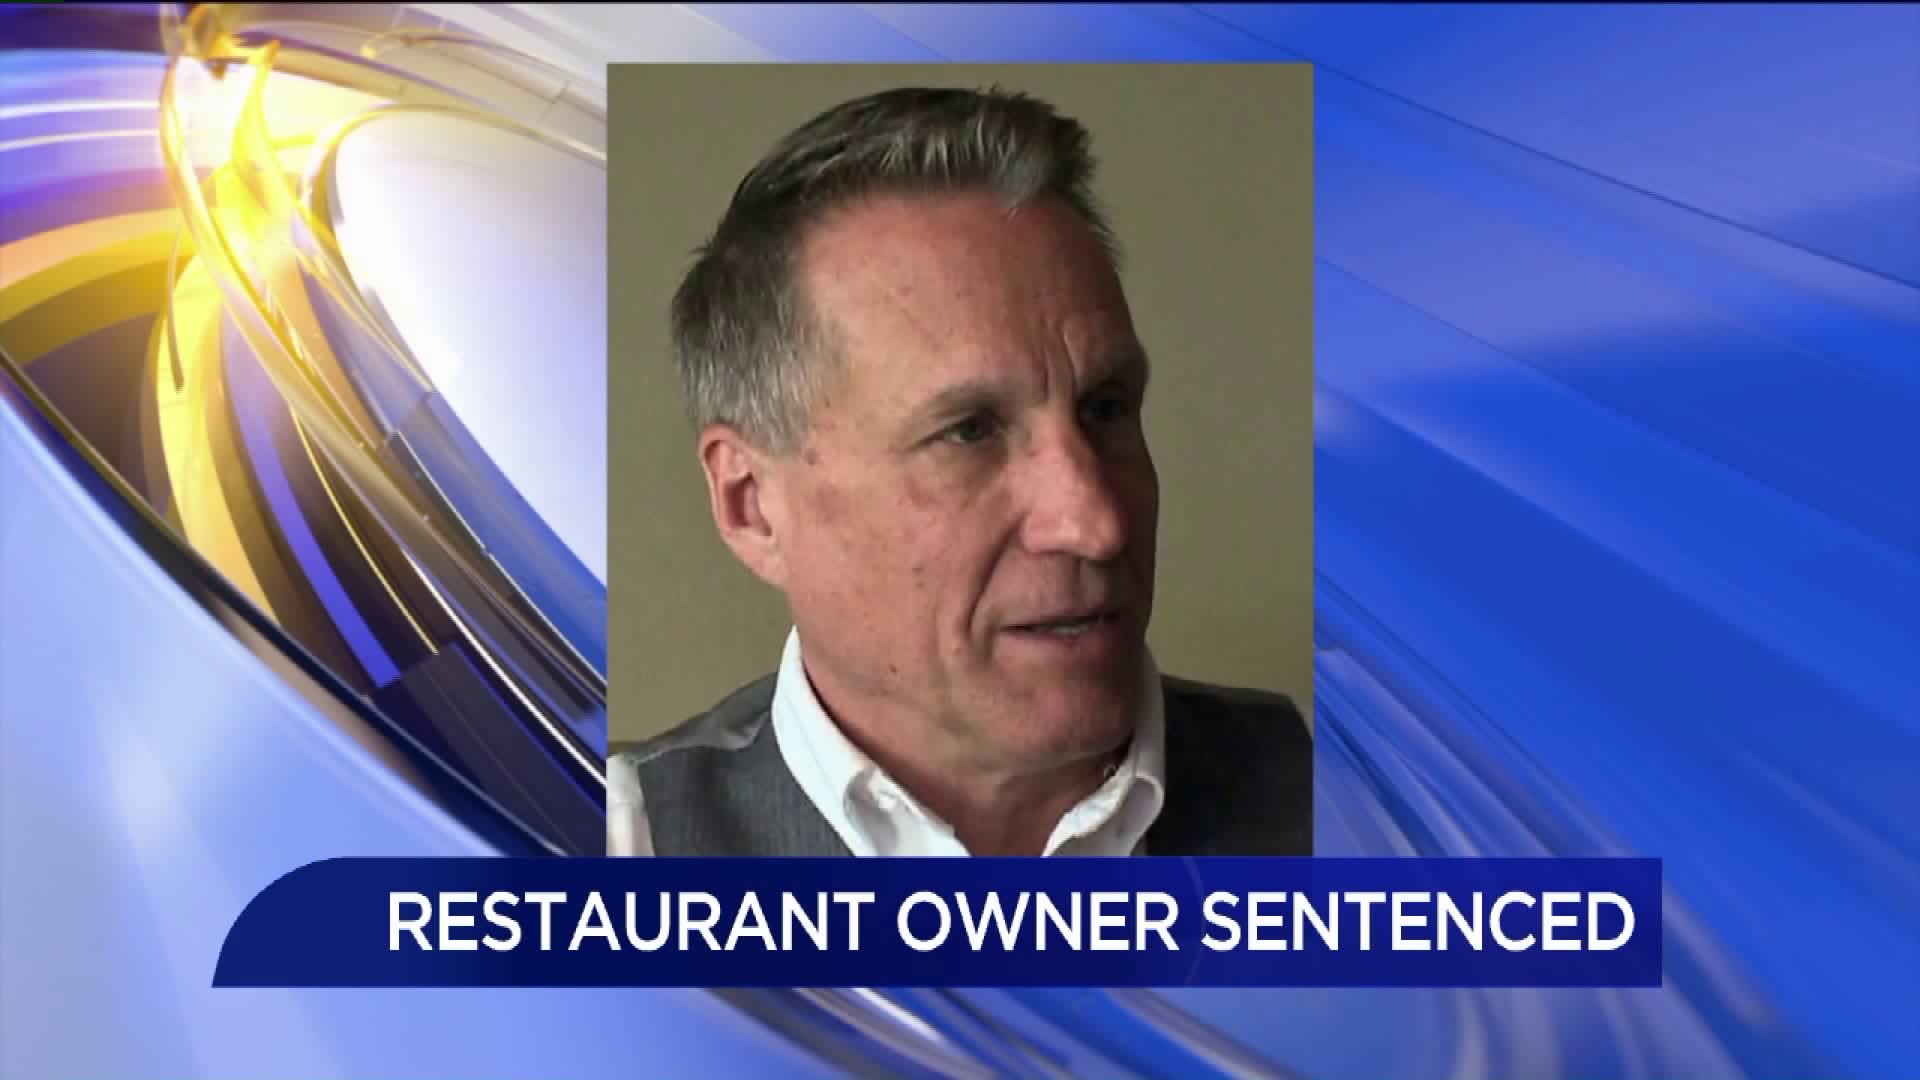 Restaurant Owner Sentenced to 10 Years Probation on Tax Charges